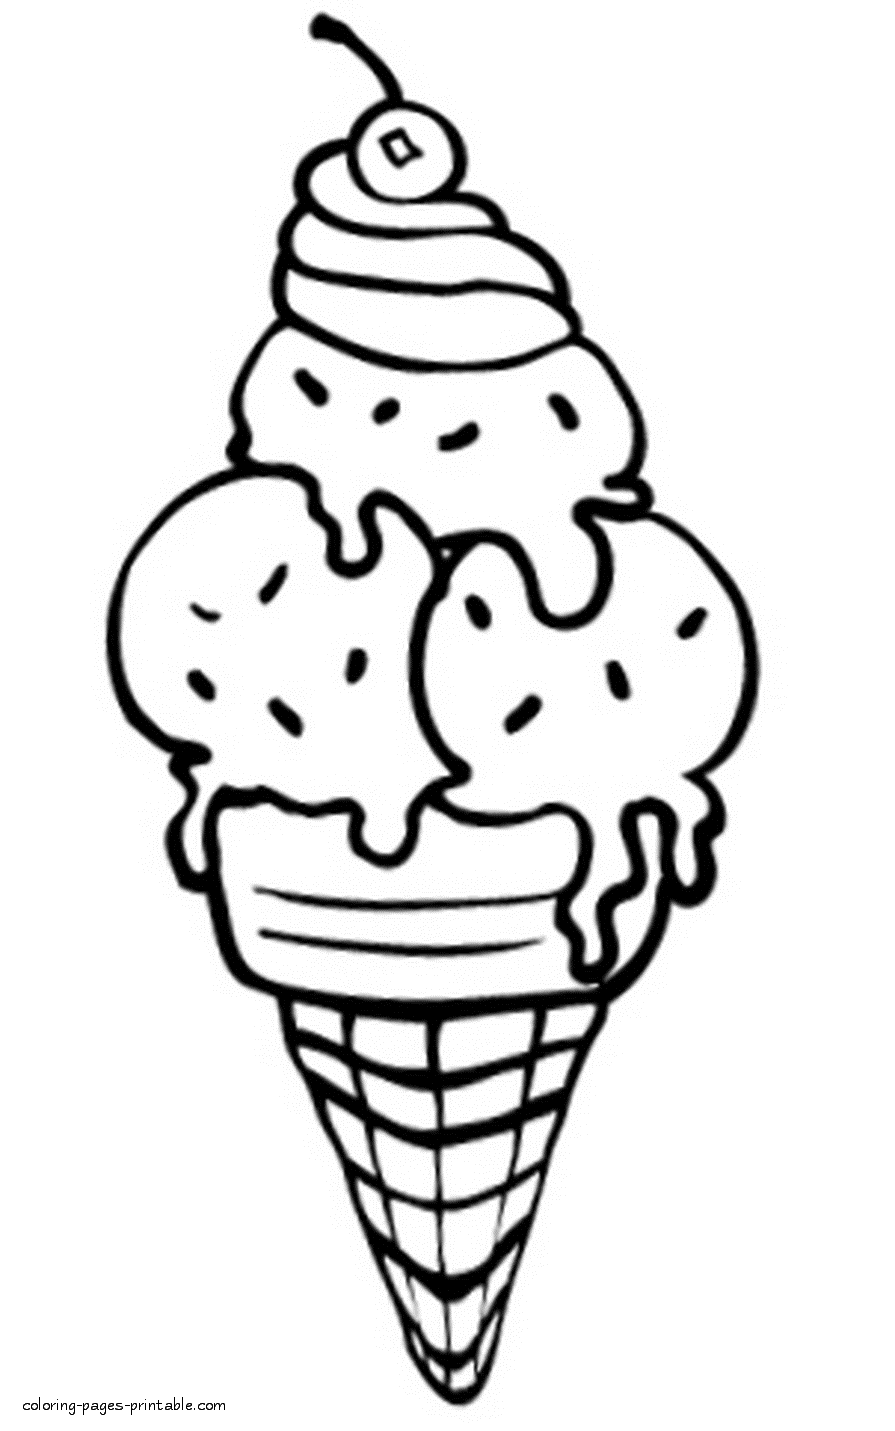 Beautiful ice cream coloring page || COLORING-PAGES-PRINTABLE.COM